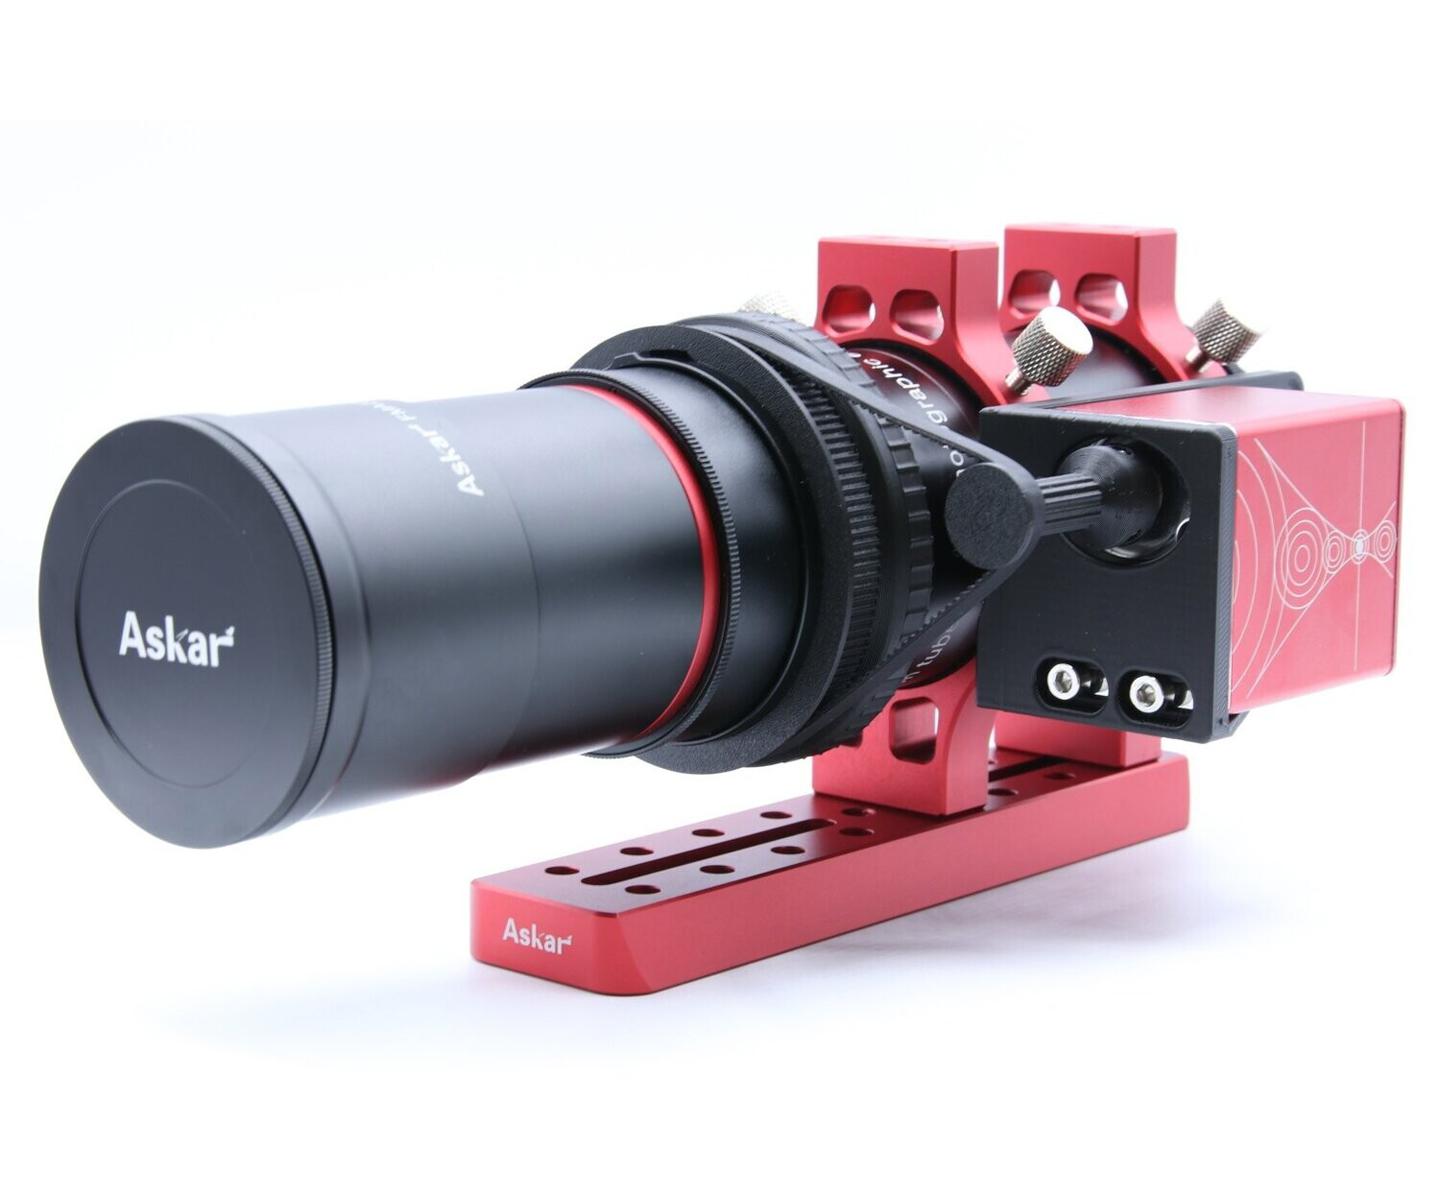  Now you can equip your Askar FMA230 telephoto lens with motorized focusing - sensitive and pleasant even in winter. [EN] 